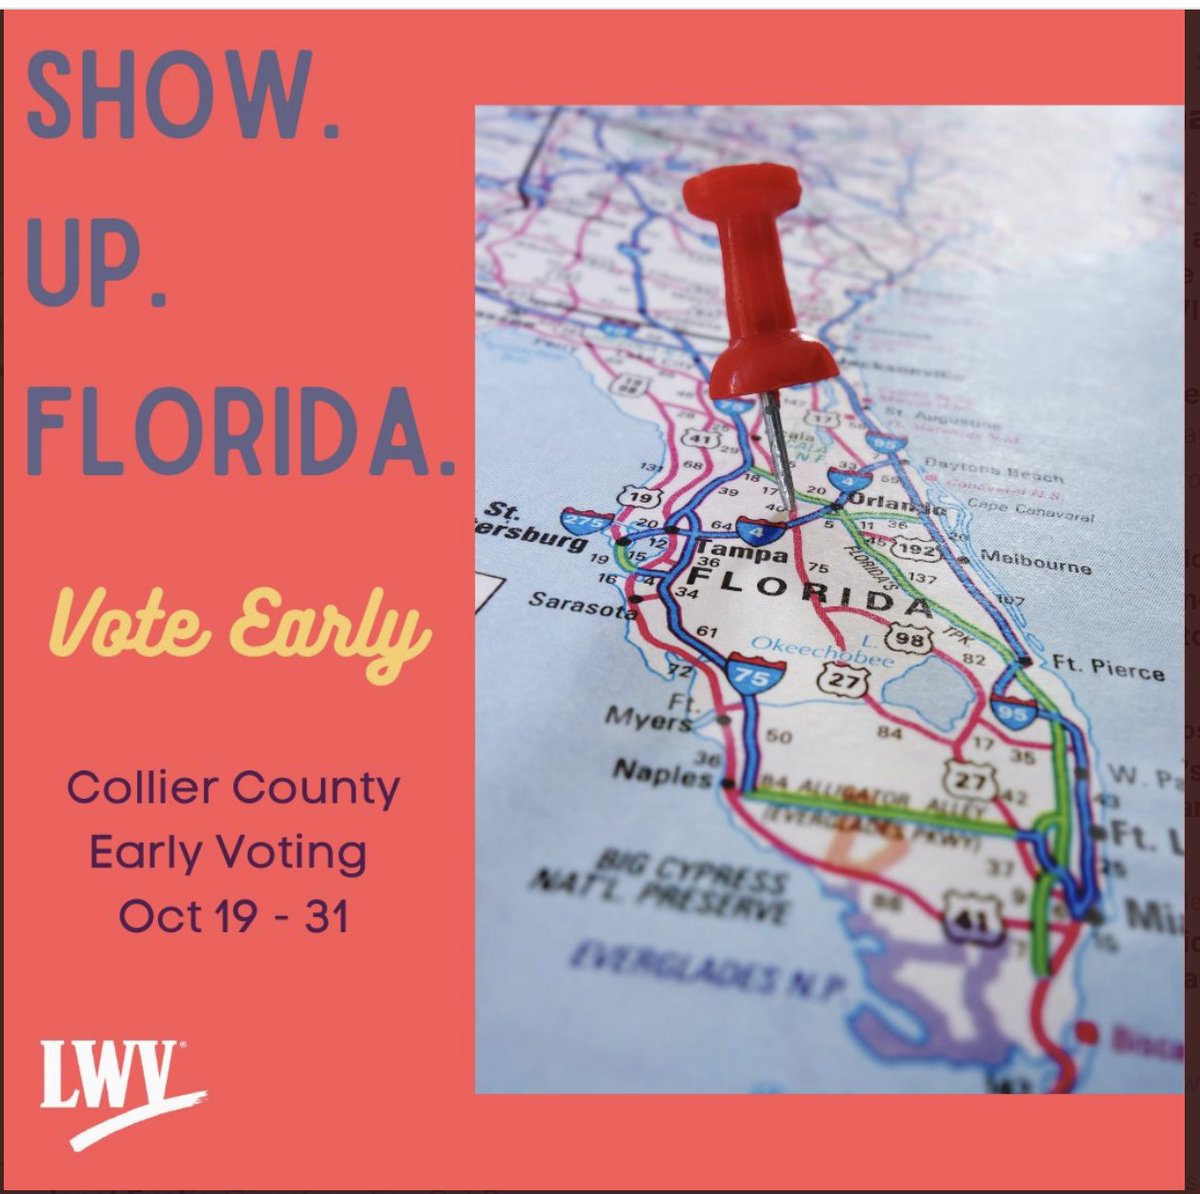 Every vote counts.  Make sure yours does!#VoteNowFL
@VOTE411 @WhenWeAllVote @StandByYourMail
@RockTheVote @CommonCauseFL  #EarlyVoting
#Everyvotecounts